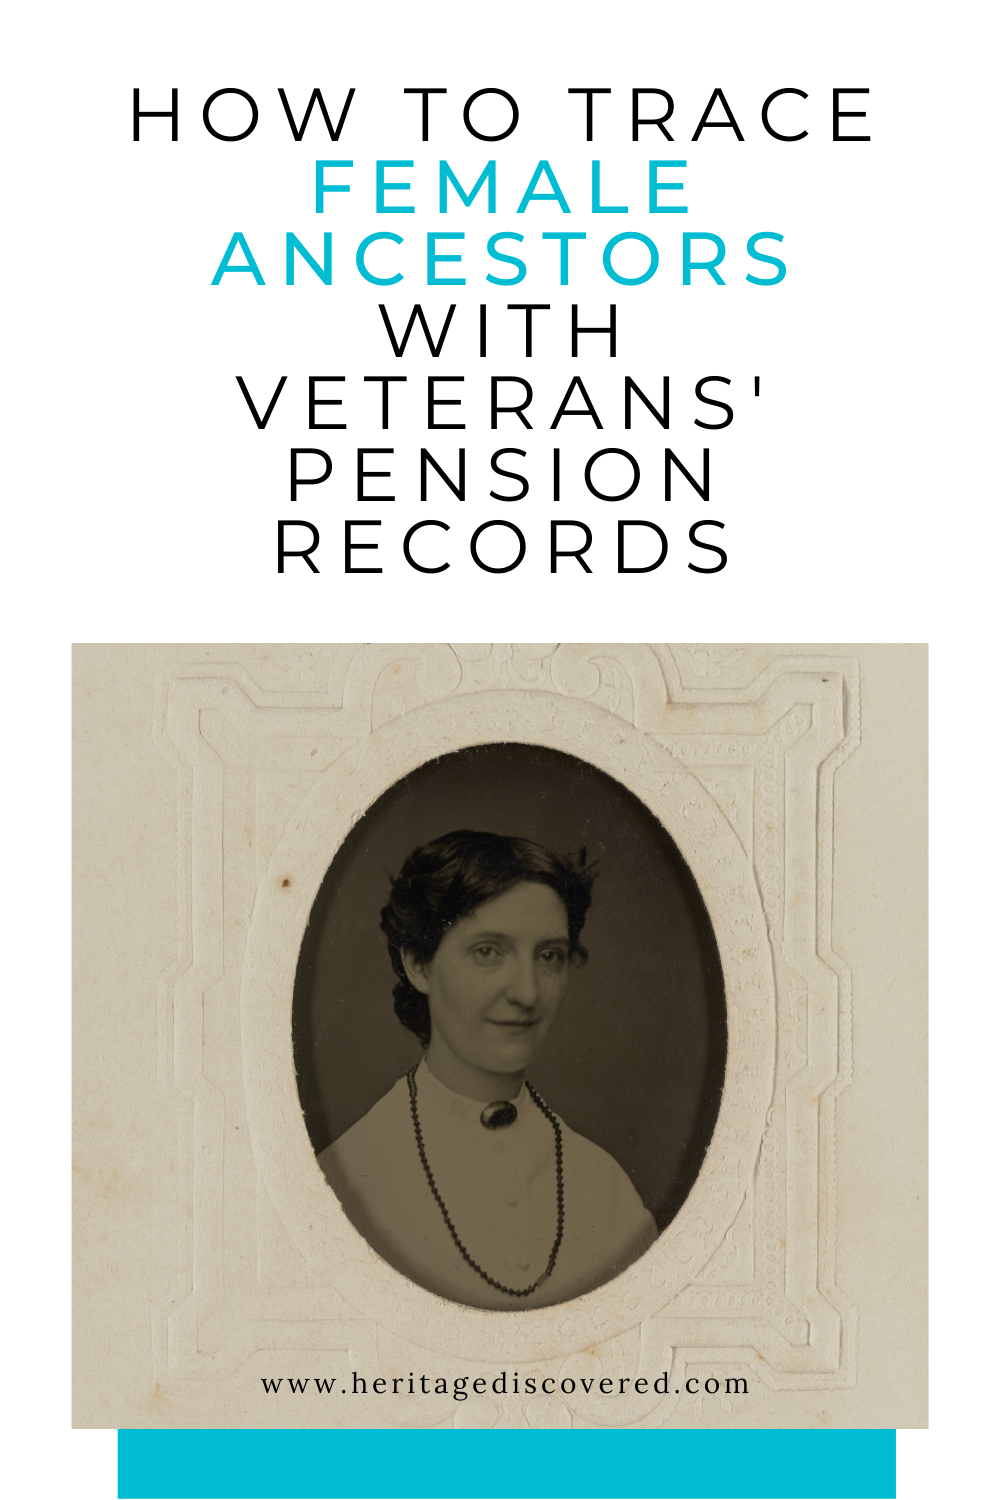 how-to-trace-female-ancestors-veterans-pension-records-6